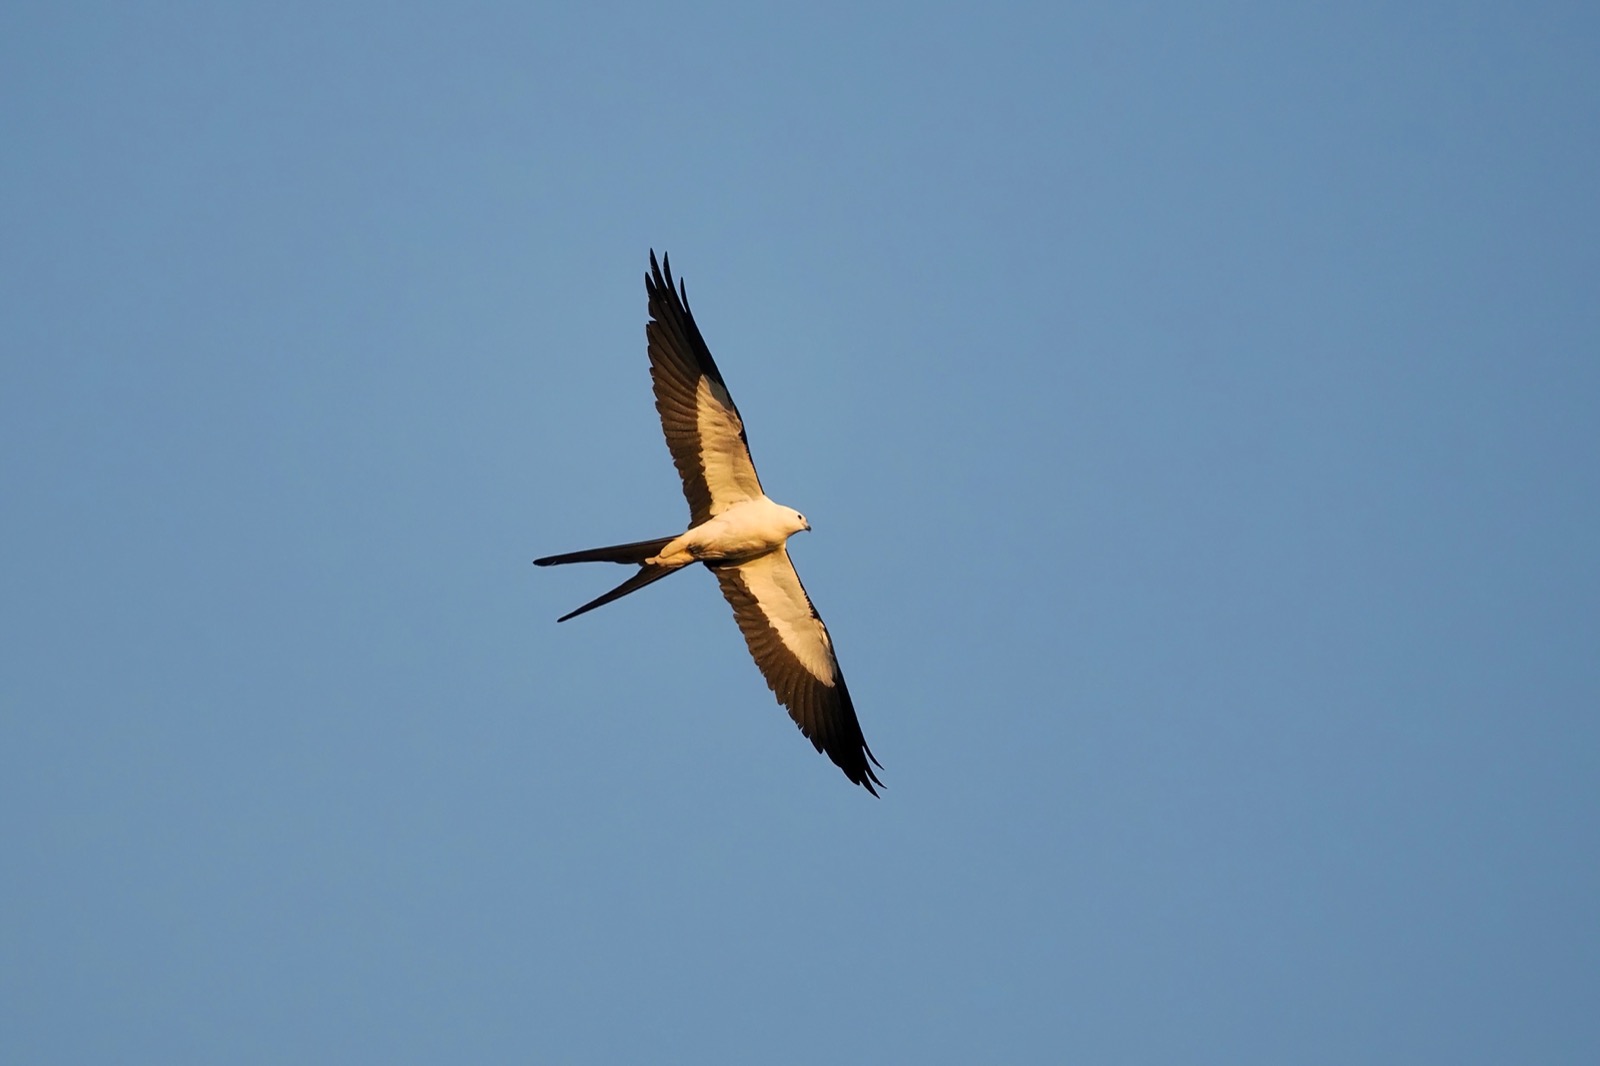 Closeup of a swallow tail kite in flight with wings spread illuminated from beneath.